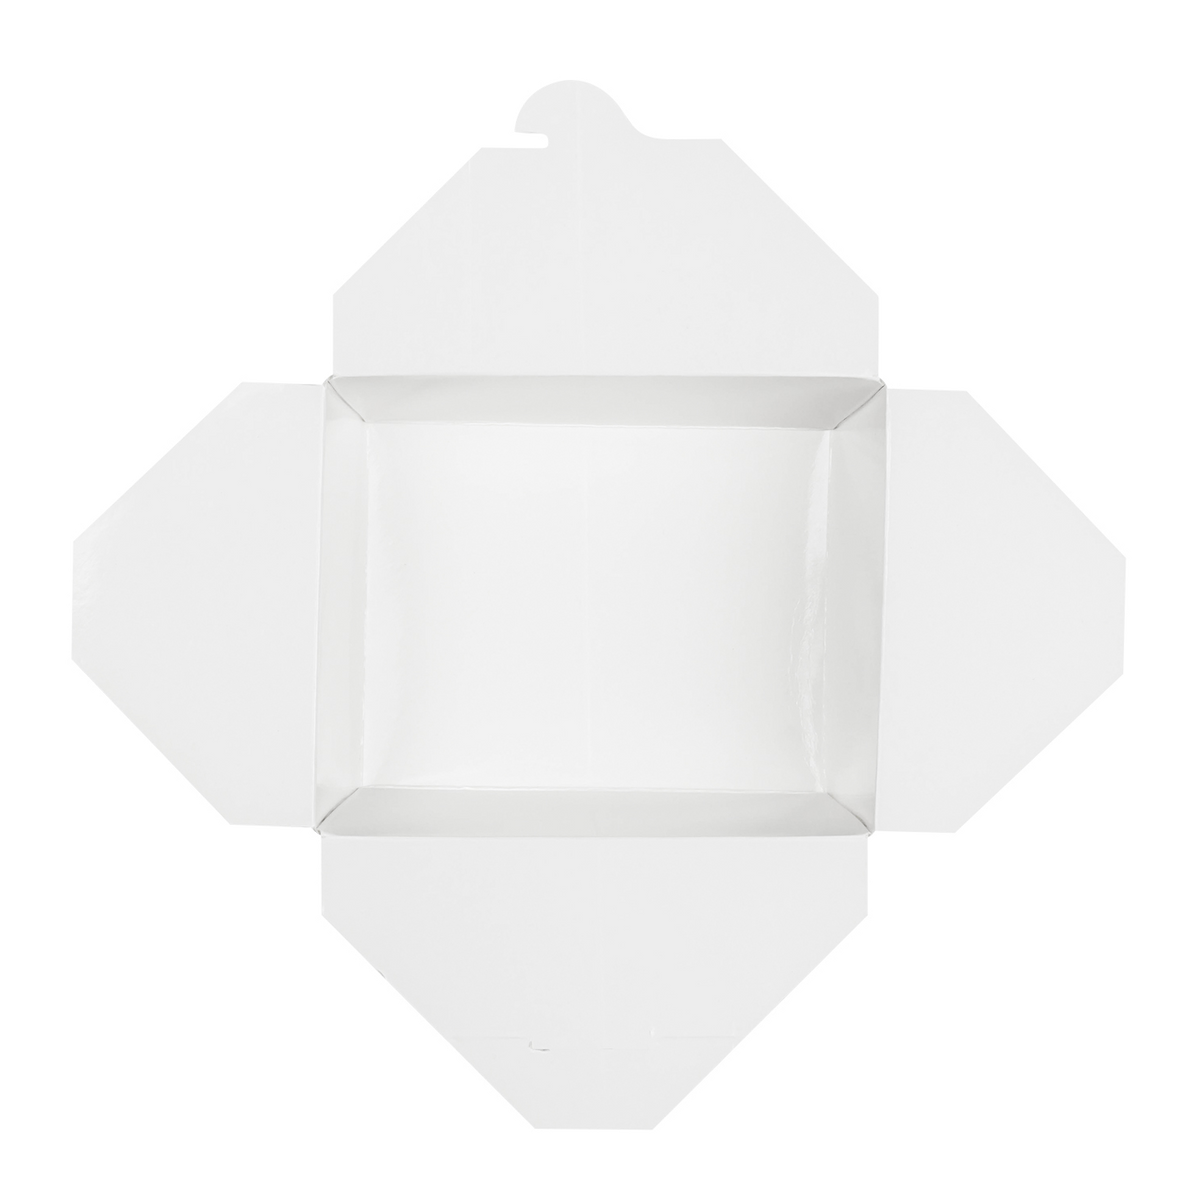 https://www.restaurantsupplydrops.shop/wp-content/uploads/1689/34/the-newest-white-microwavable-folded-paper-8-take-out-container-karat-fold-to-go-box-48oz-5-9-x-4-6-x-2-4-300-count-karat-is-now-available-for-purchase-at-a-great-price_1.png